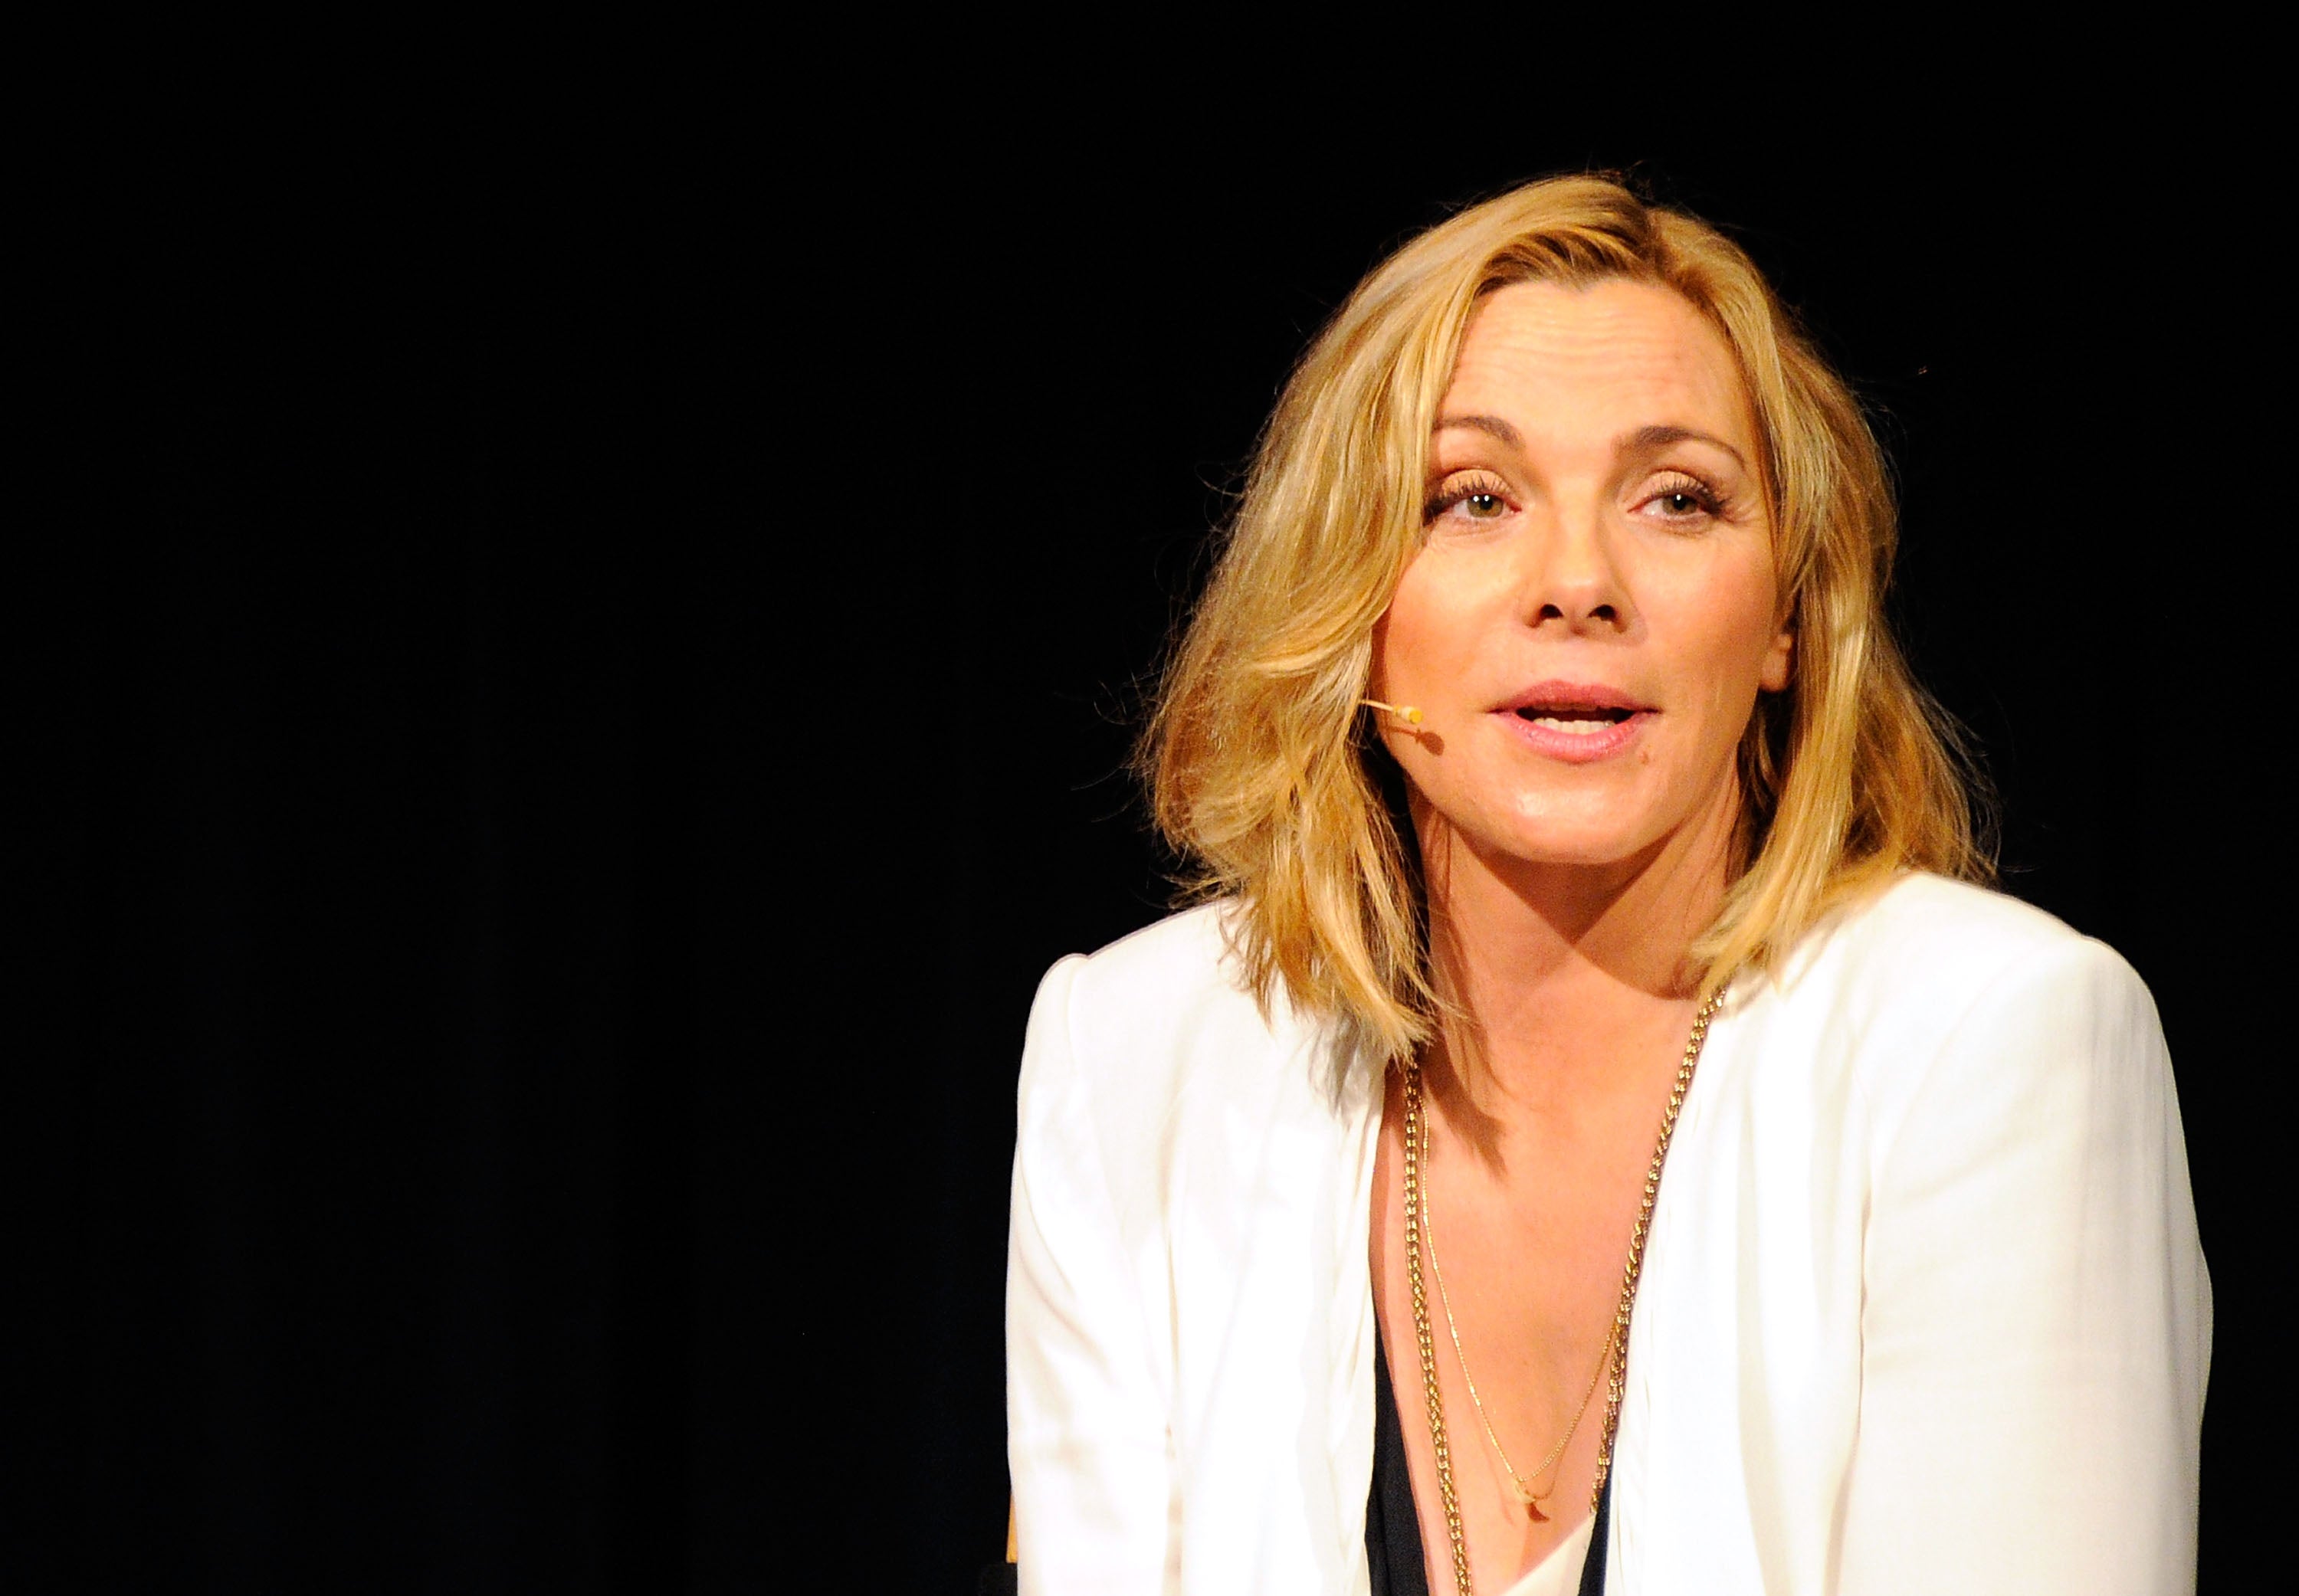 Kim Cattrall says 19-hour days on Sex and the City meant she didnt have time for a baby The Independent